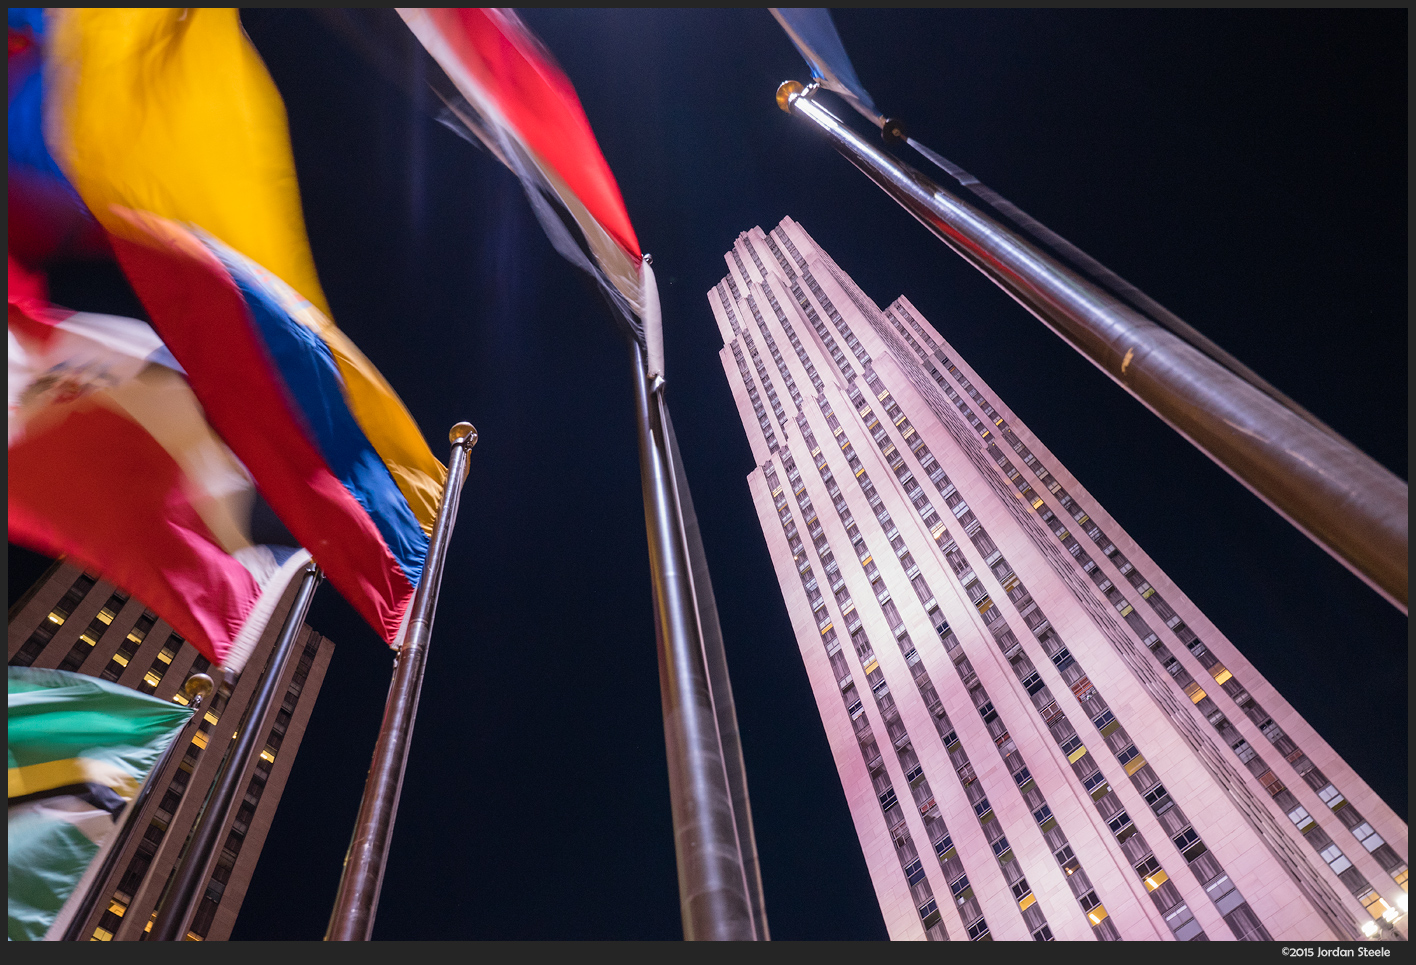 30 Rock Flags - Sony A7 II with Zeiss FE 16-35mm f/4 @